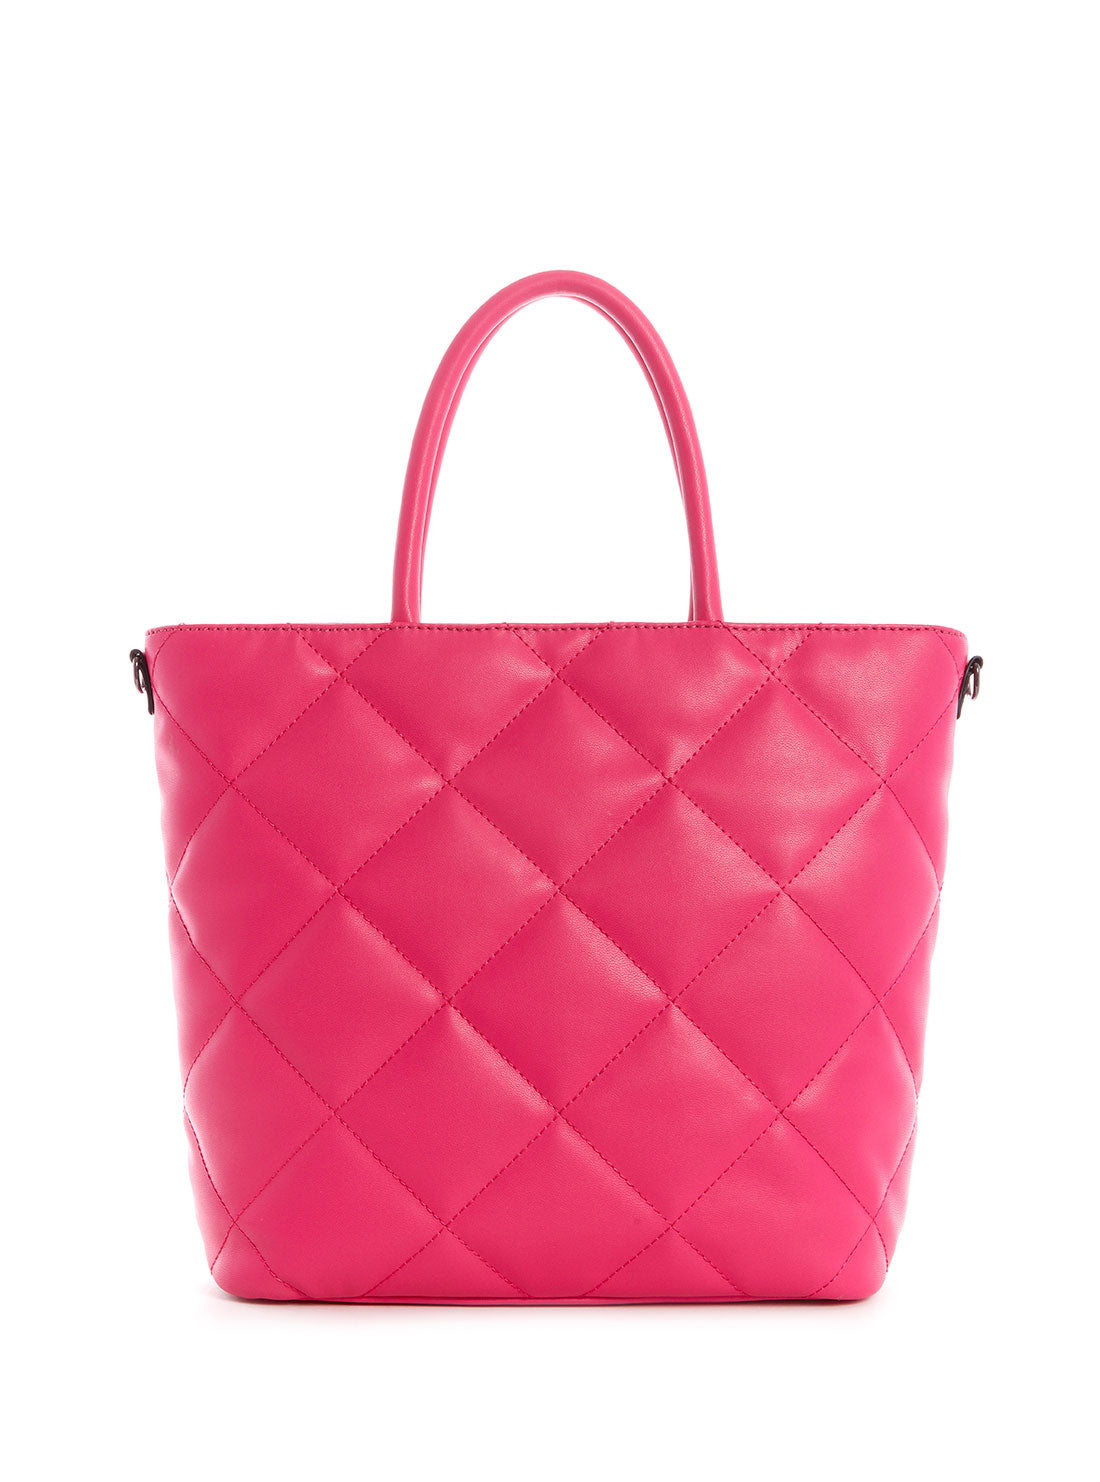 GUESS Womens Hot Pink Quilted Brightside Tote Bag QM758023 Back View